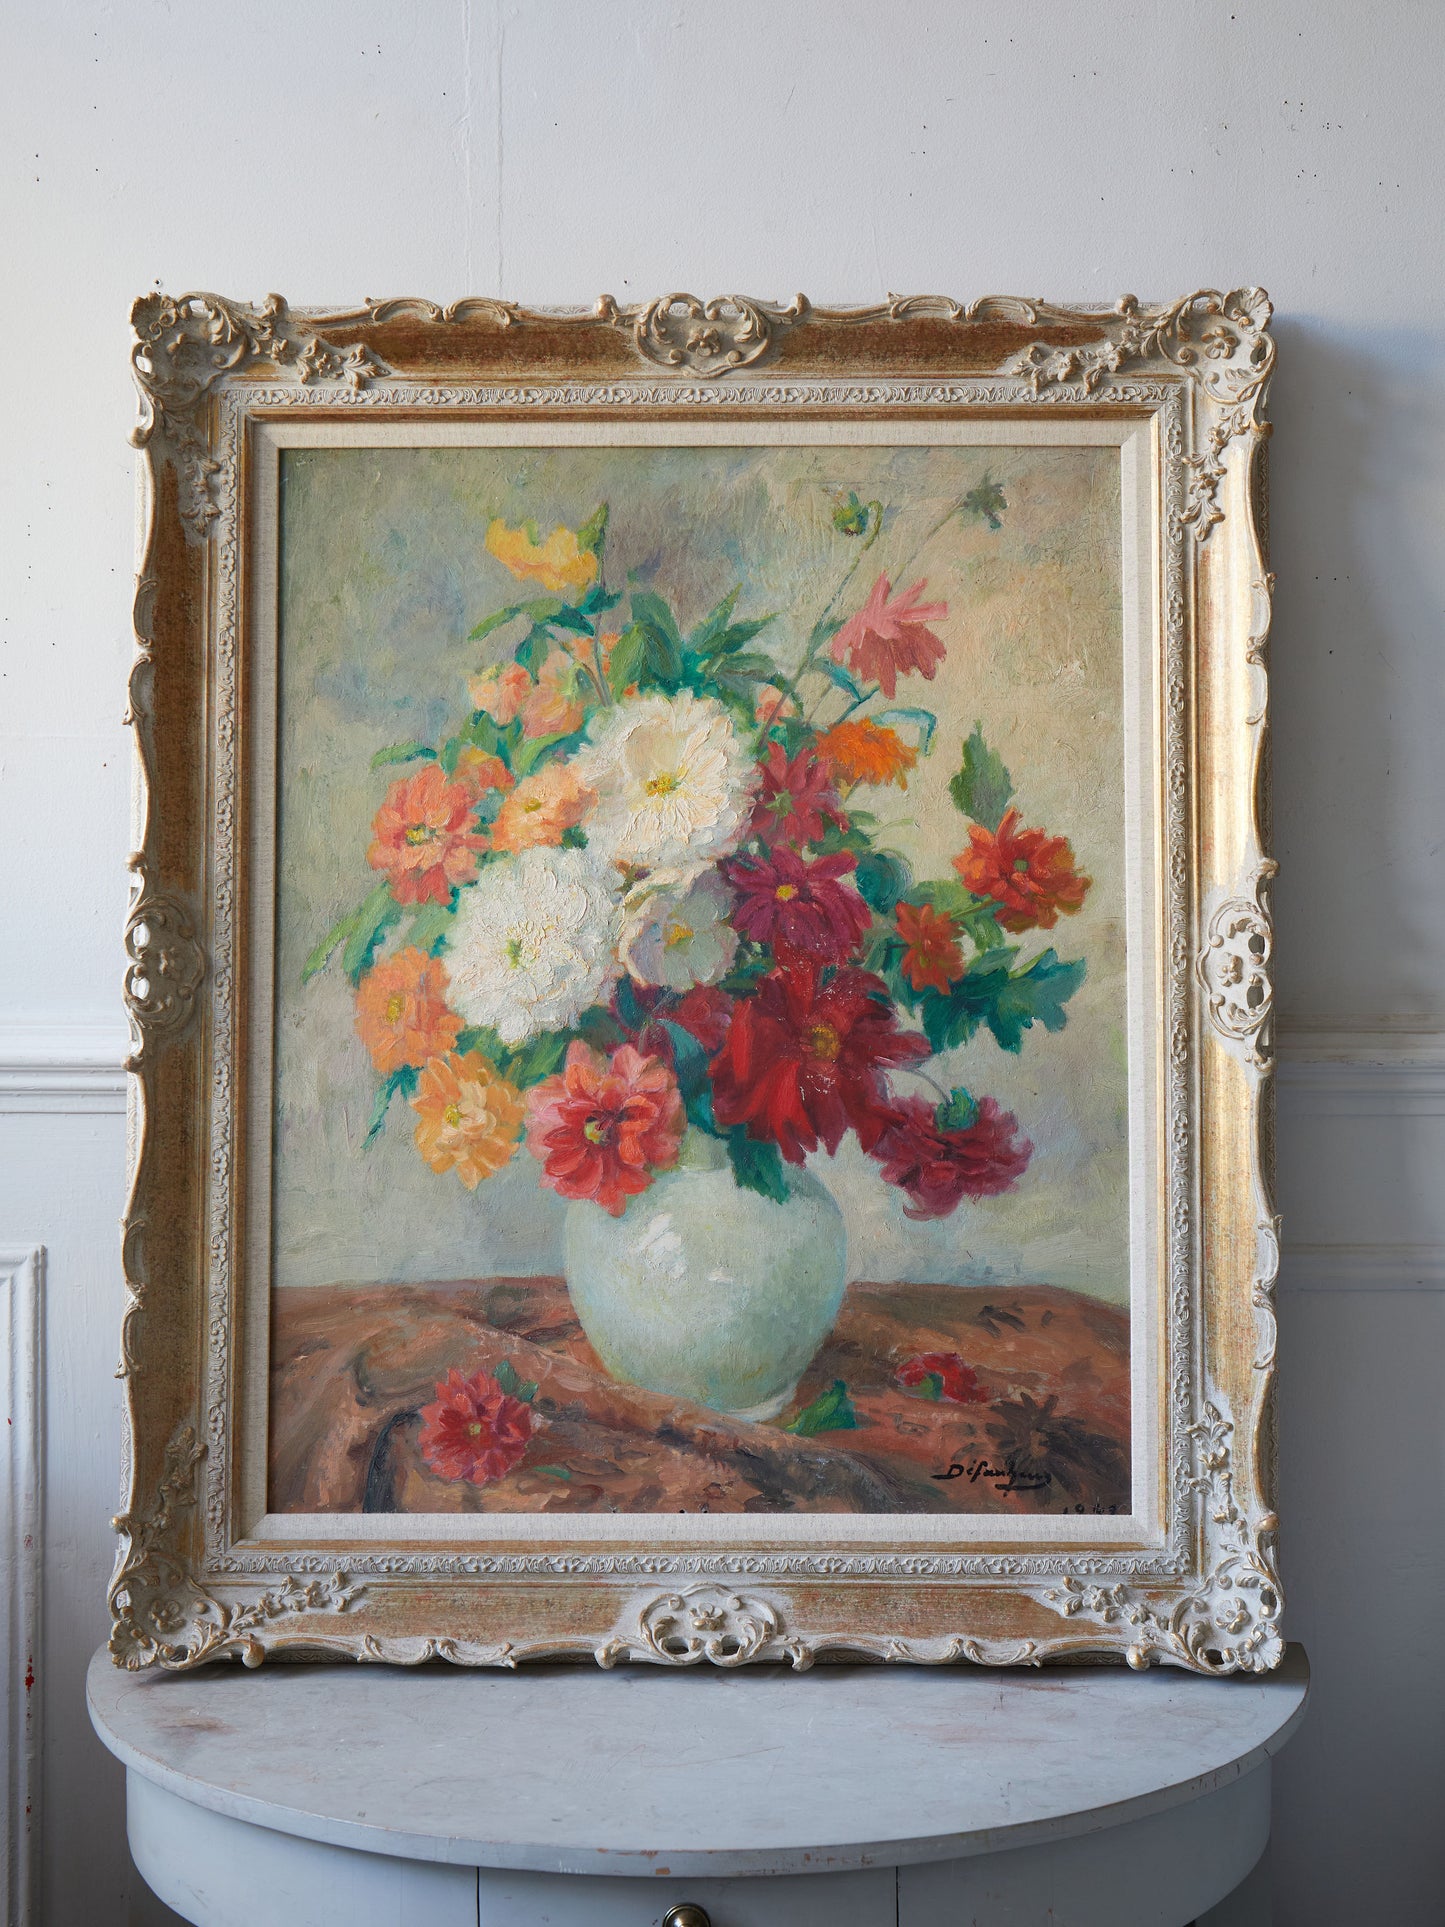 A Large Floral Still Life by Eugene Defauchoux